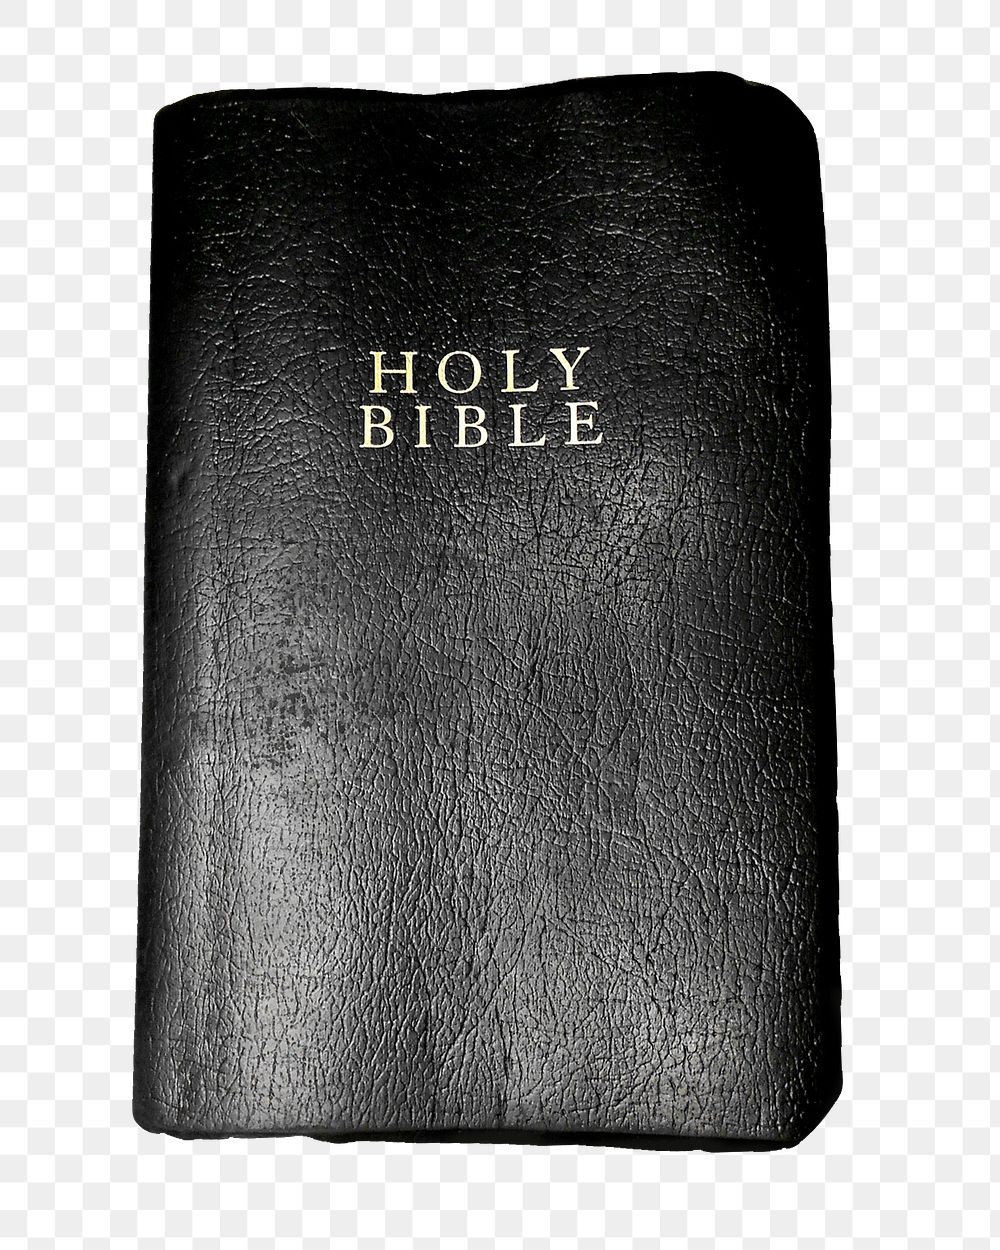 Holy Bible book png sticker, transparent background